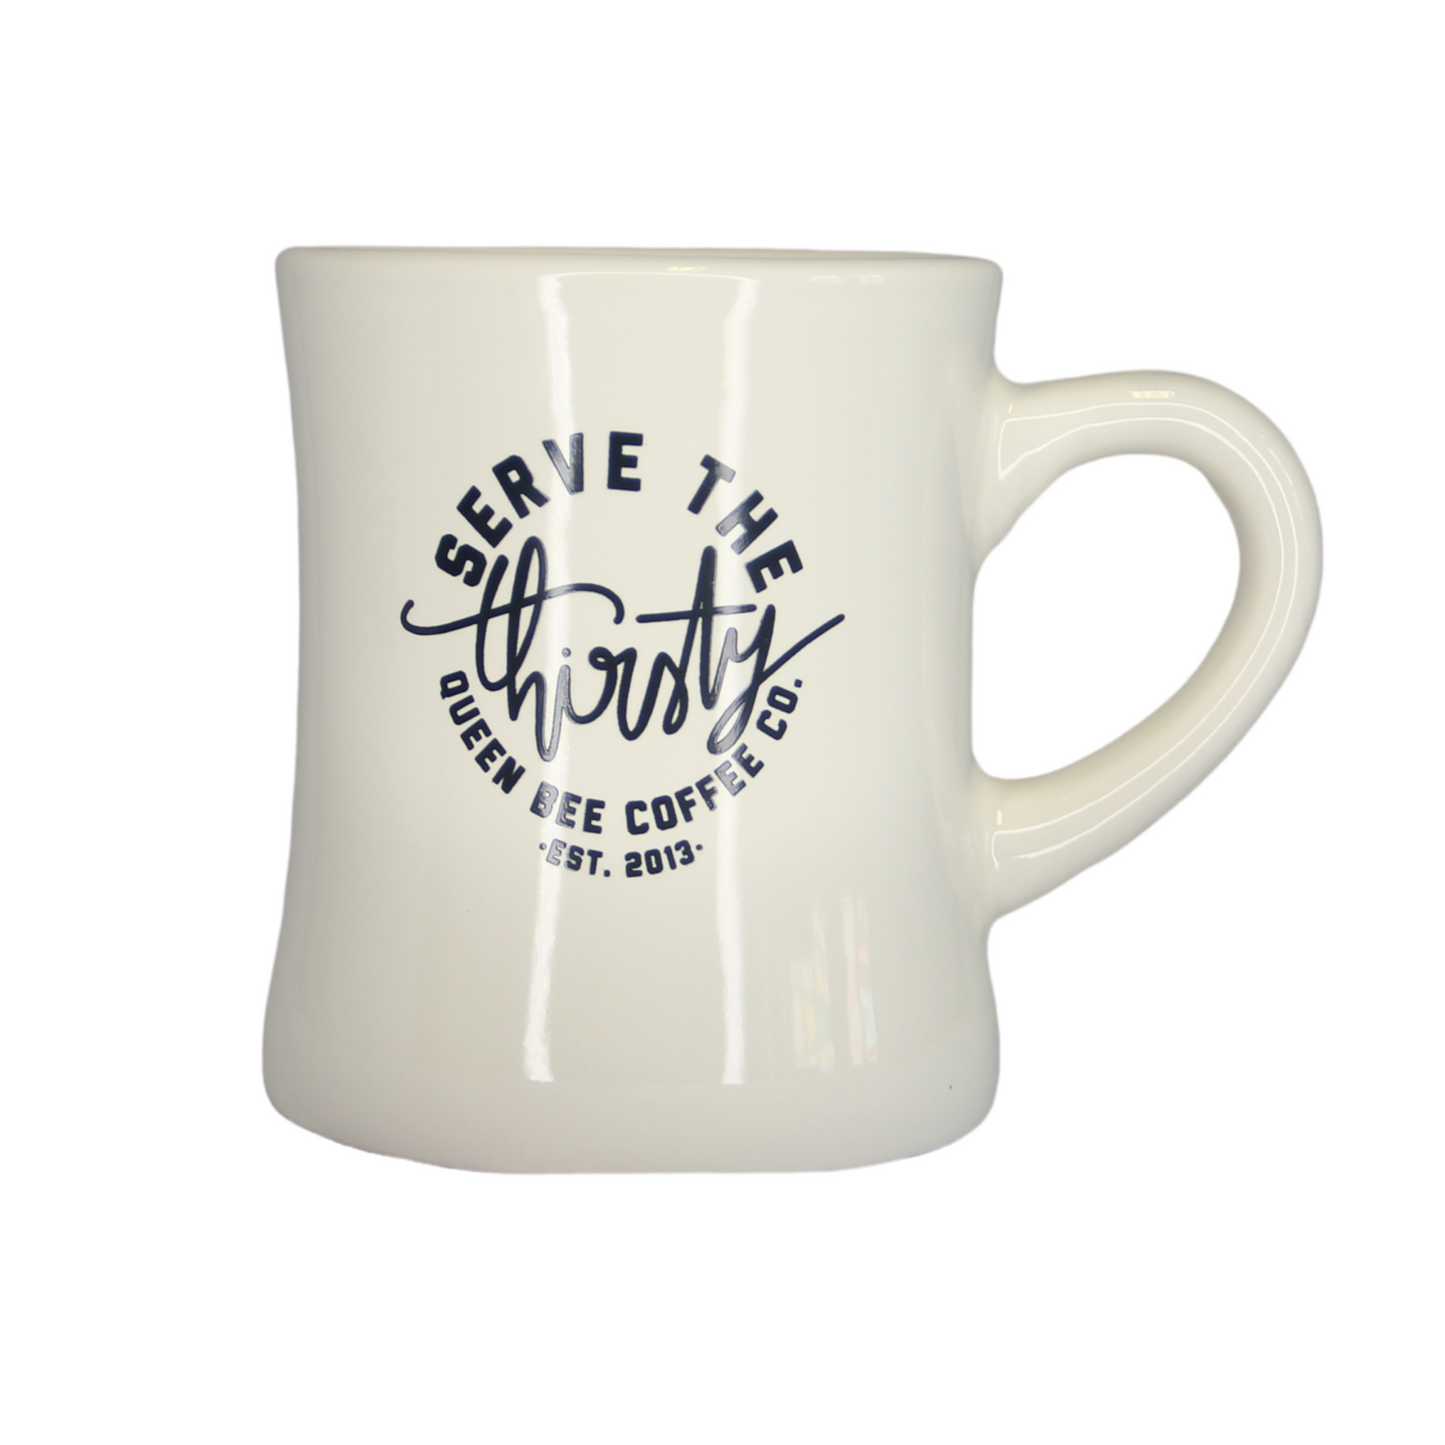 Cheers Mate Mug - The Queen's Pantry